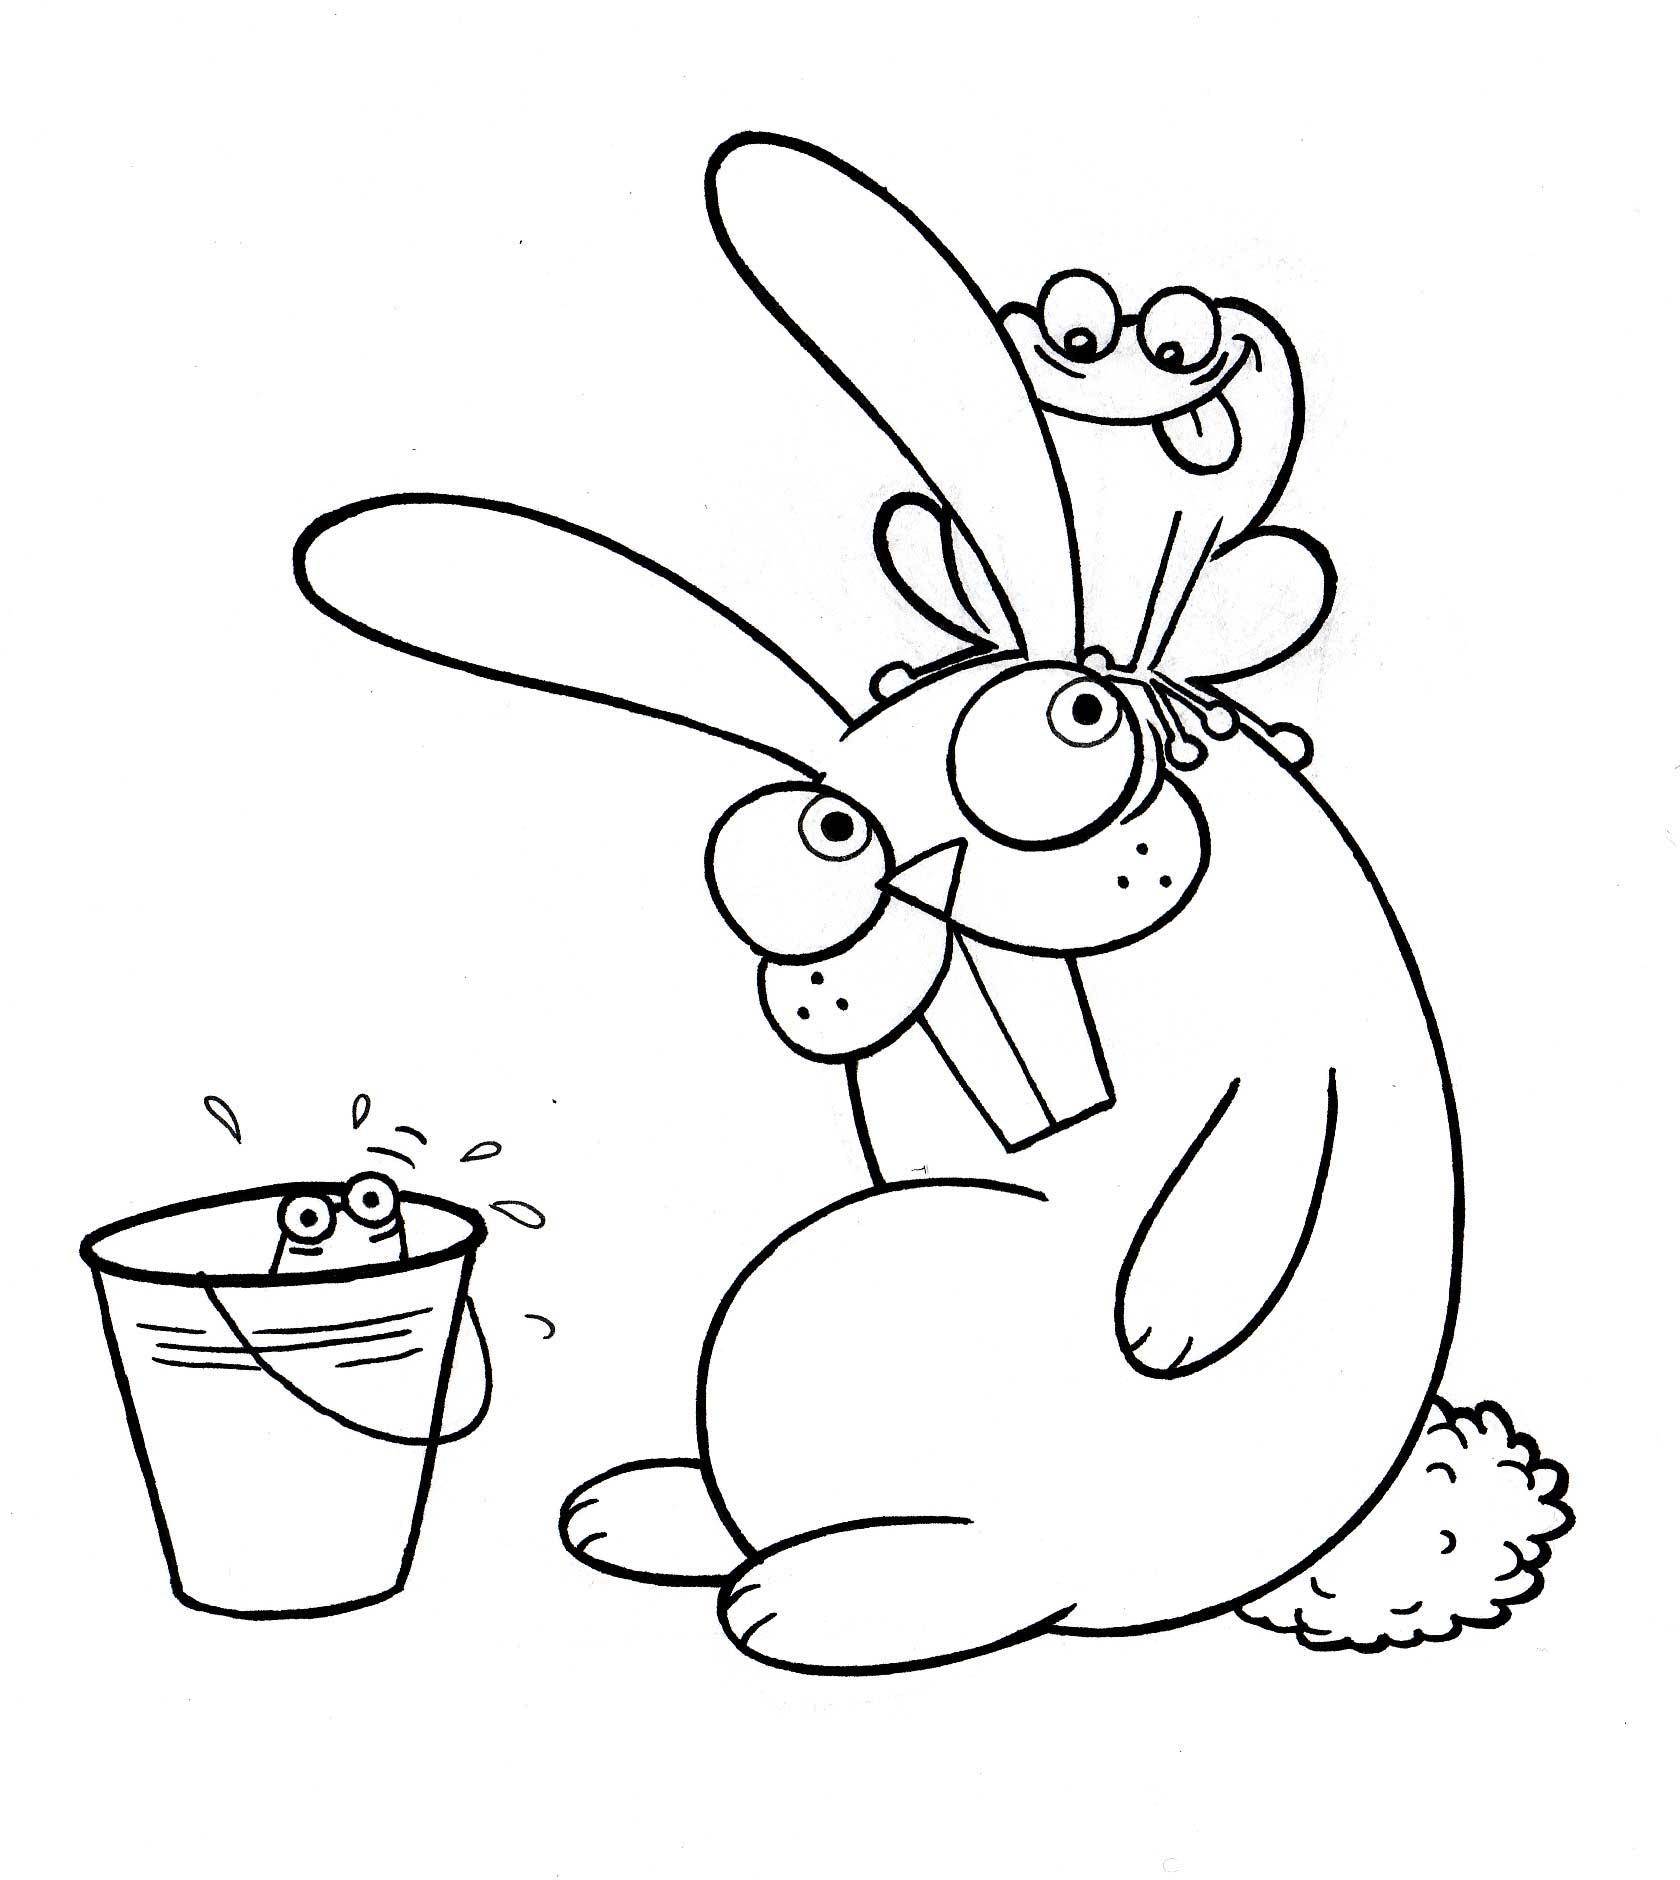 Coloring Drawing rabbit and frog. Category Pets allowed. Tags:  hare, rabbit.